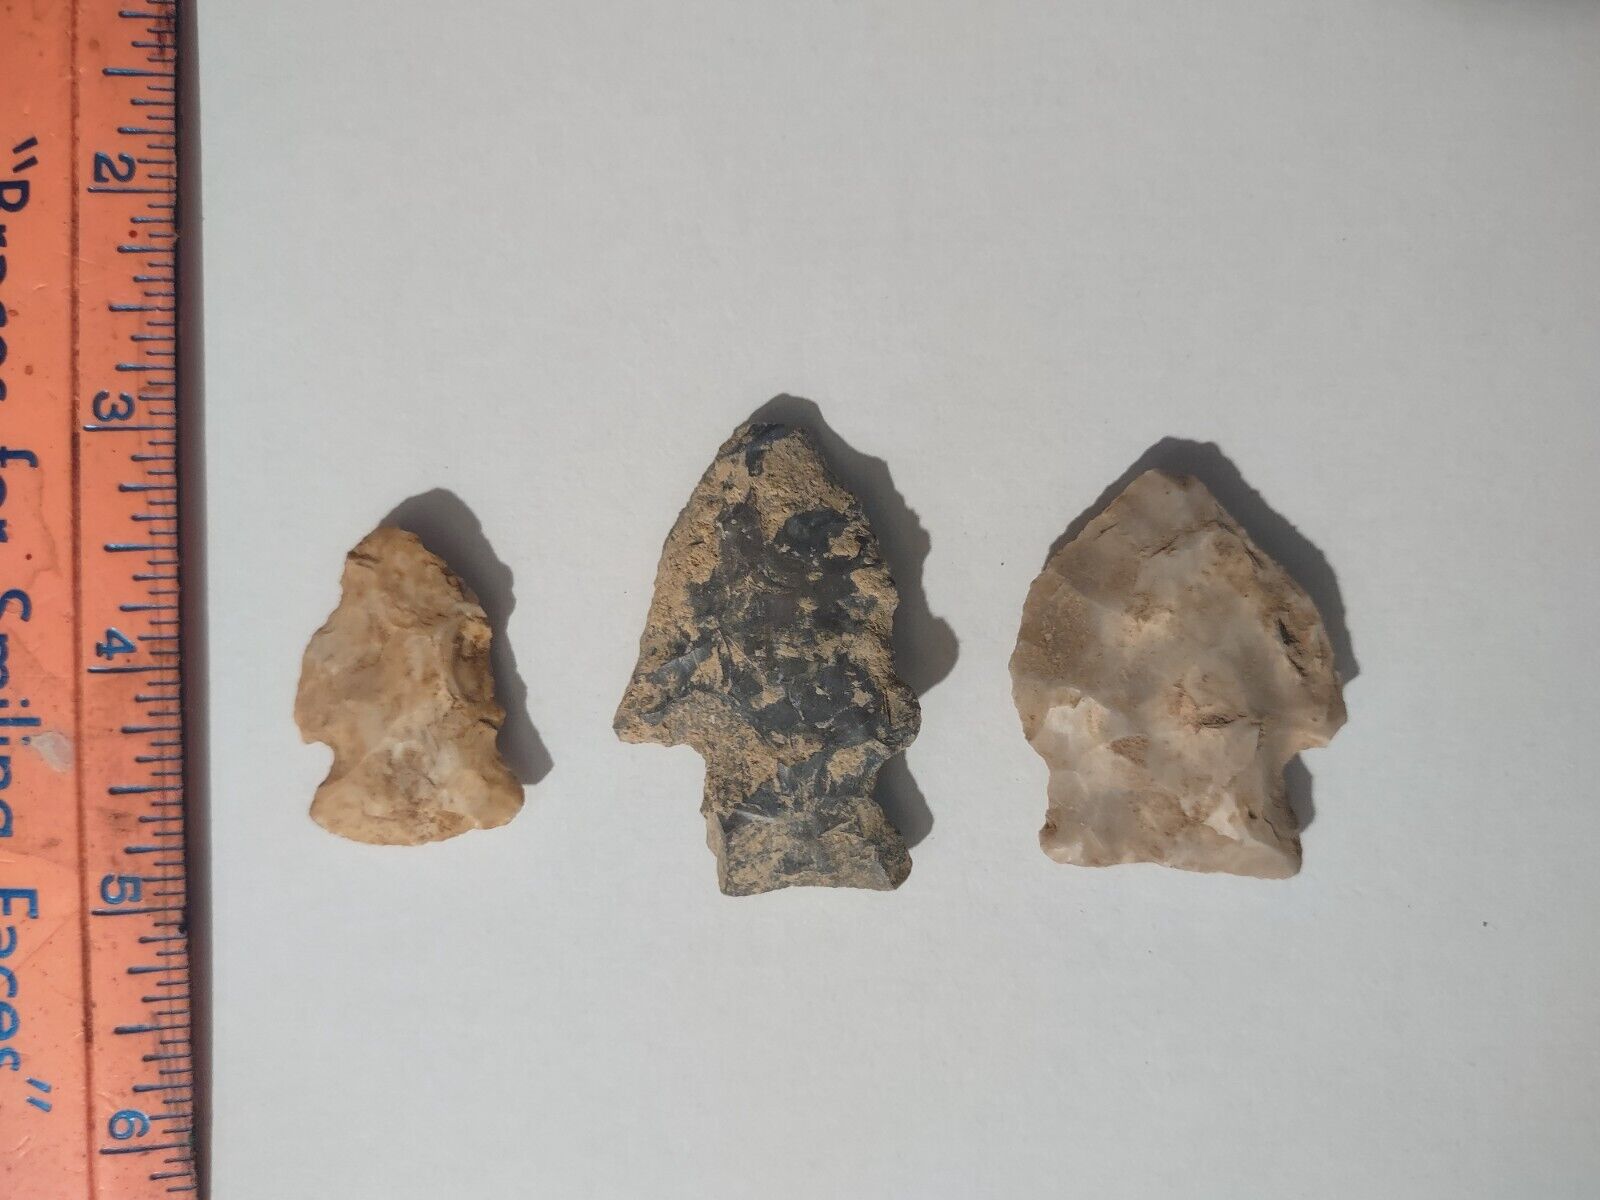 Authentic Native American Arrowheads Artifacts North Carolina Lot of 3 q